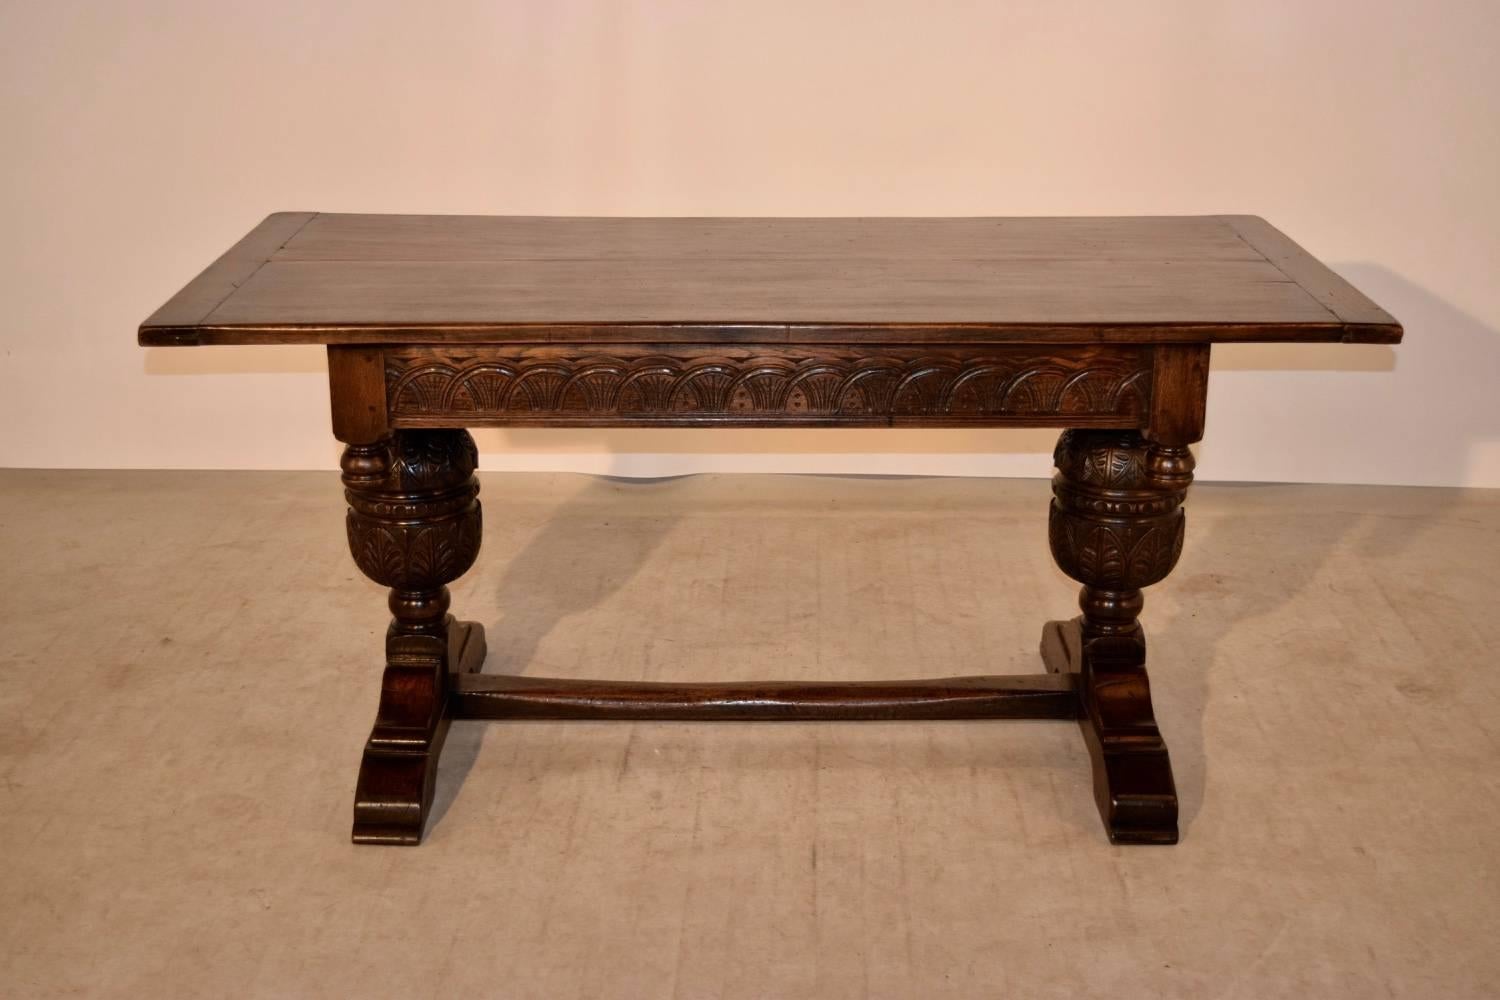 19th century English oak trestle table with a thick two board top with banded ends, following down to a hand-carved decorated apron decorated with hand turned finials and hand carved and turned bulbous legs with wonderful trestle bases joined by a